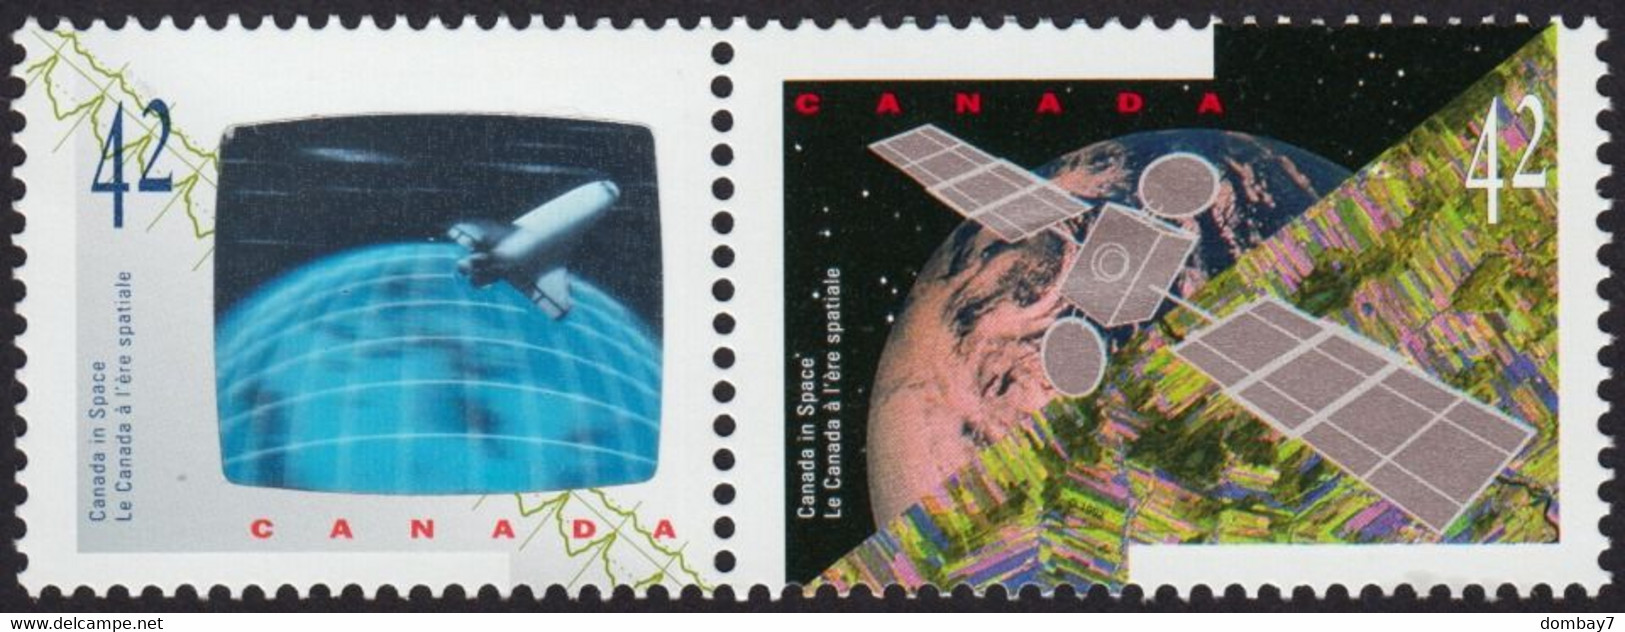 Qt. CANADA IN SPACE = 3D, HOLOGRAM (right) = SATELLITE, SHUTTLE Se-tenant Pair, TYPE-2 Canada 1992 Sc#1442a MNH - Hologrammes